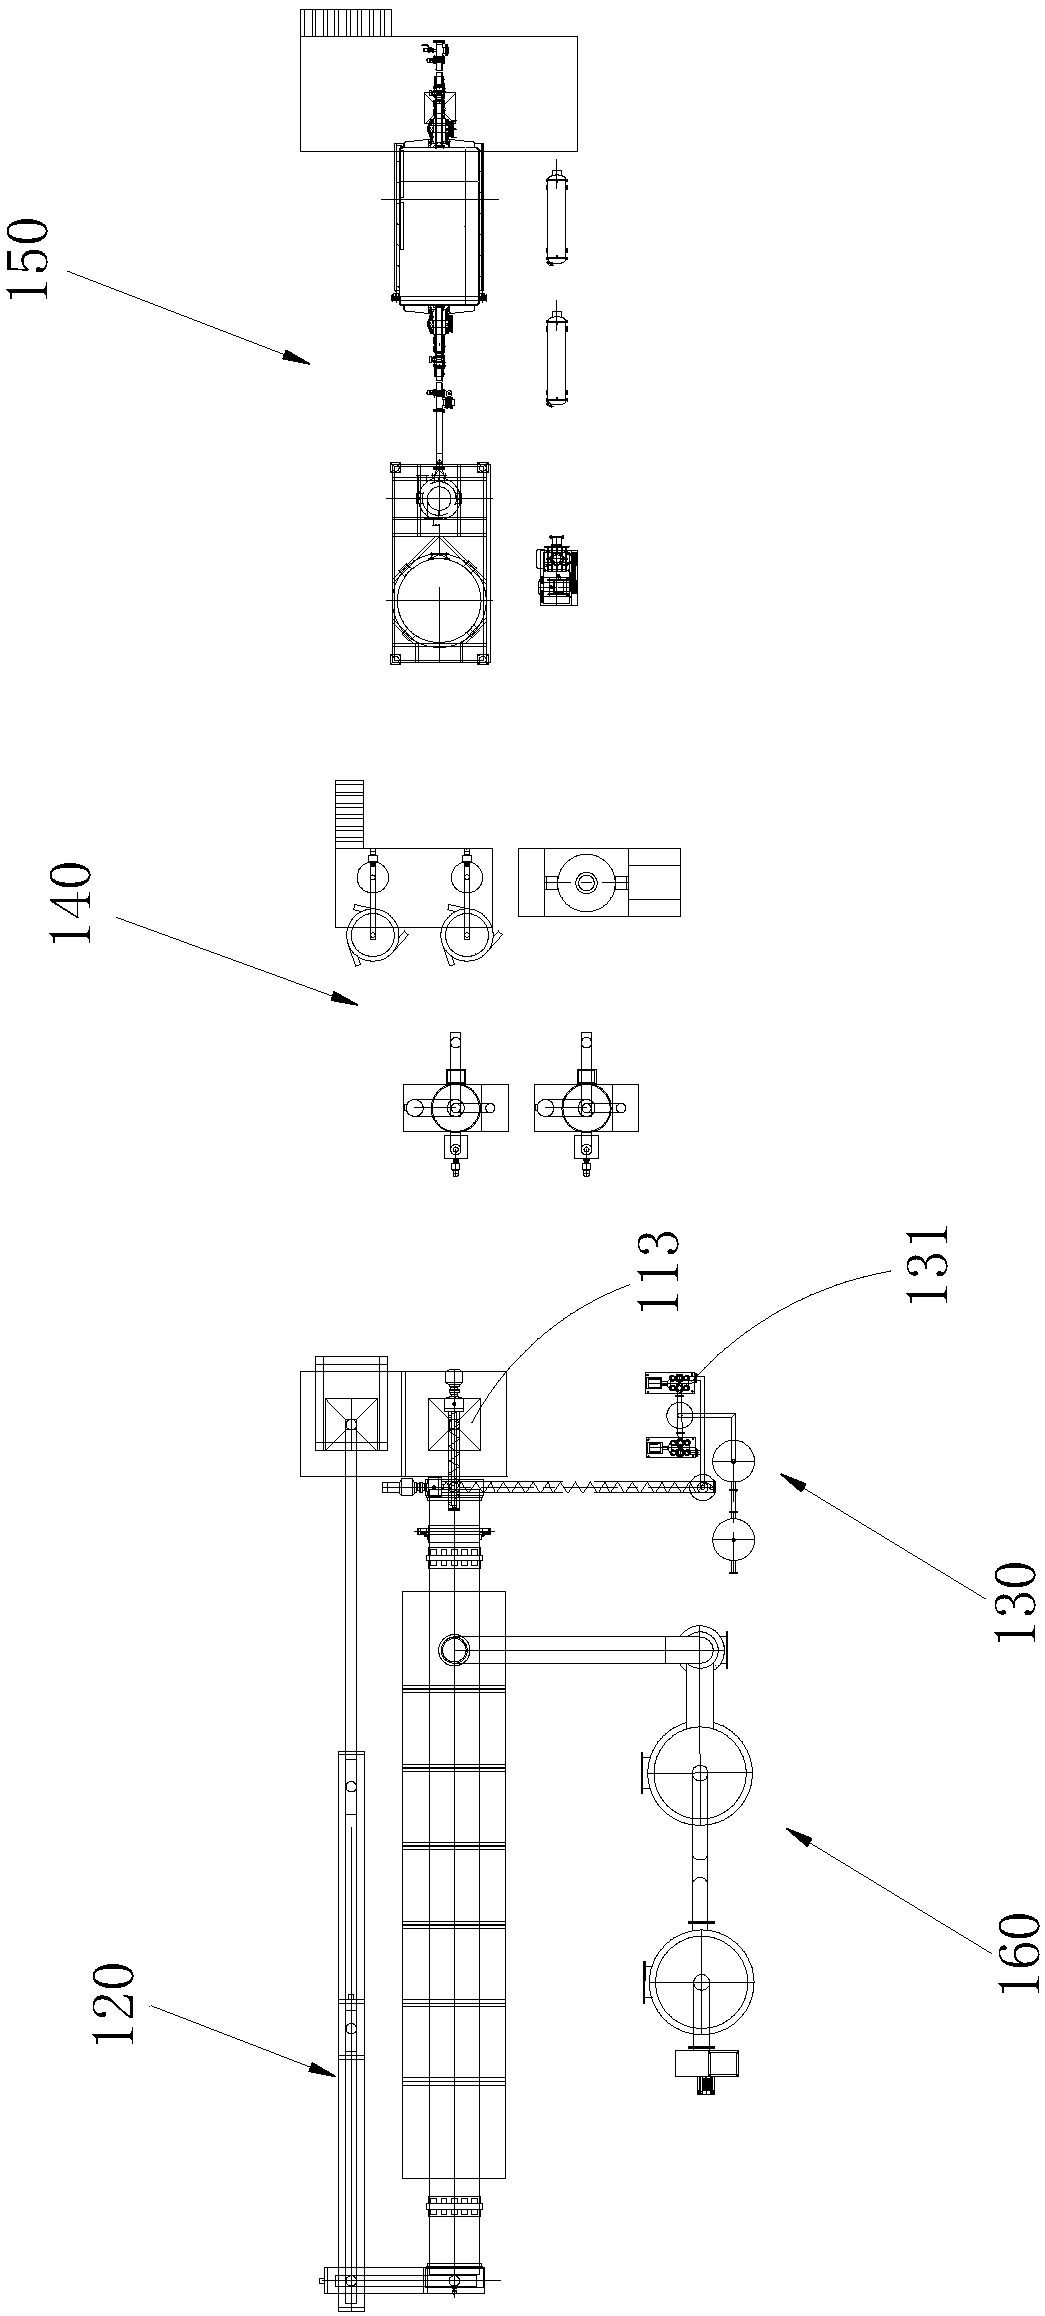 Production system for producing industrial copper powder based on pyrolysis and hydrogen embrittlement principles